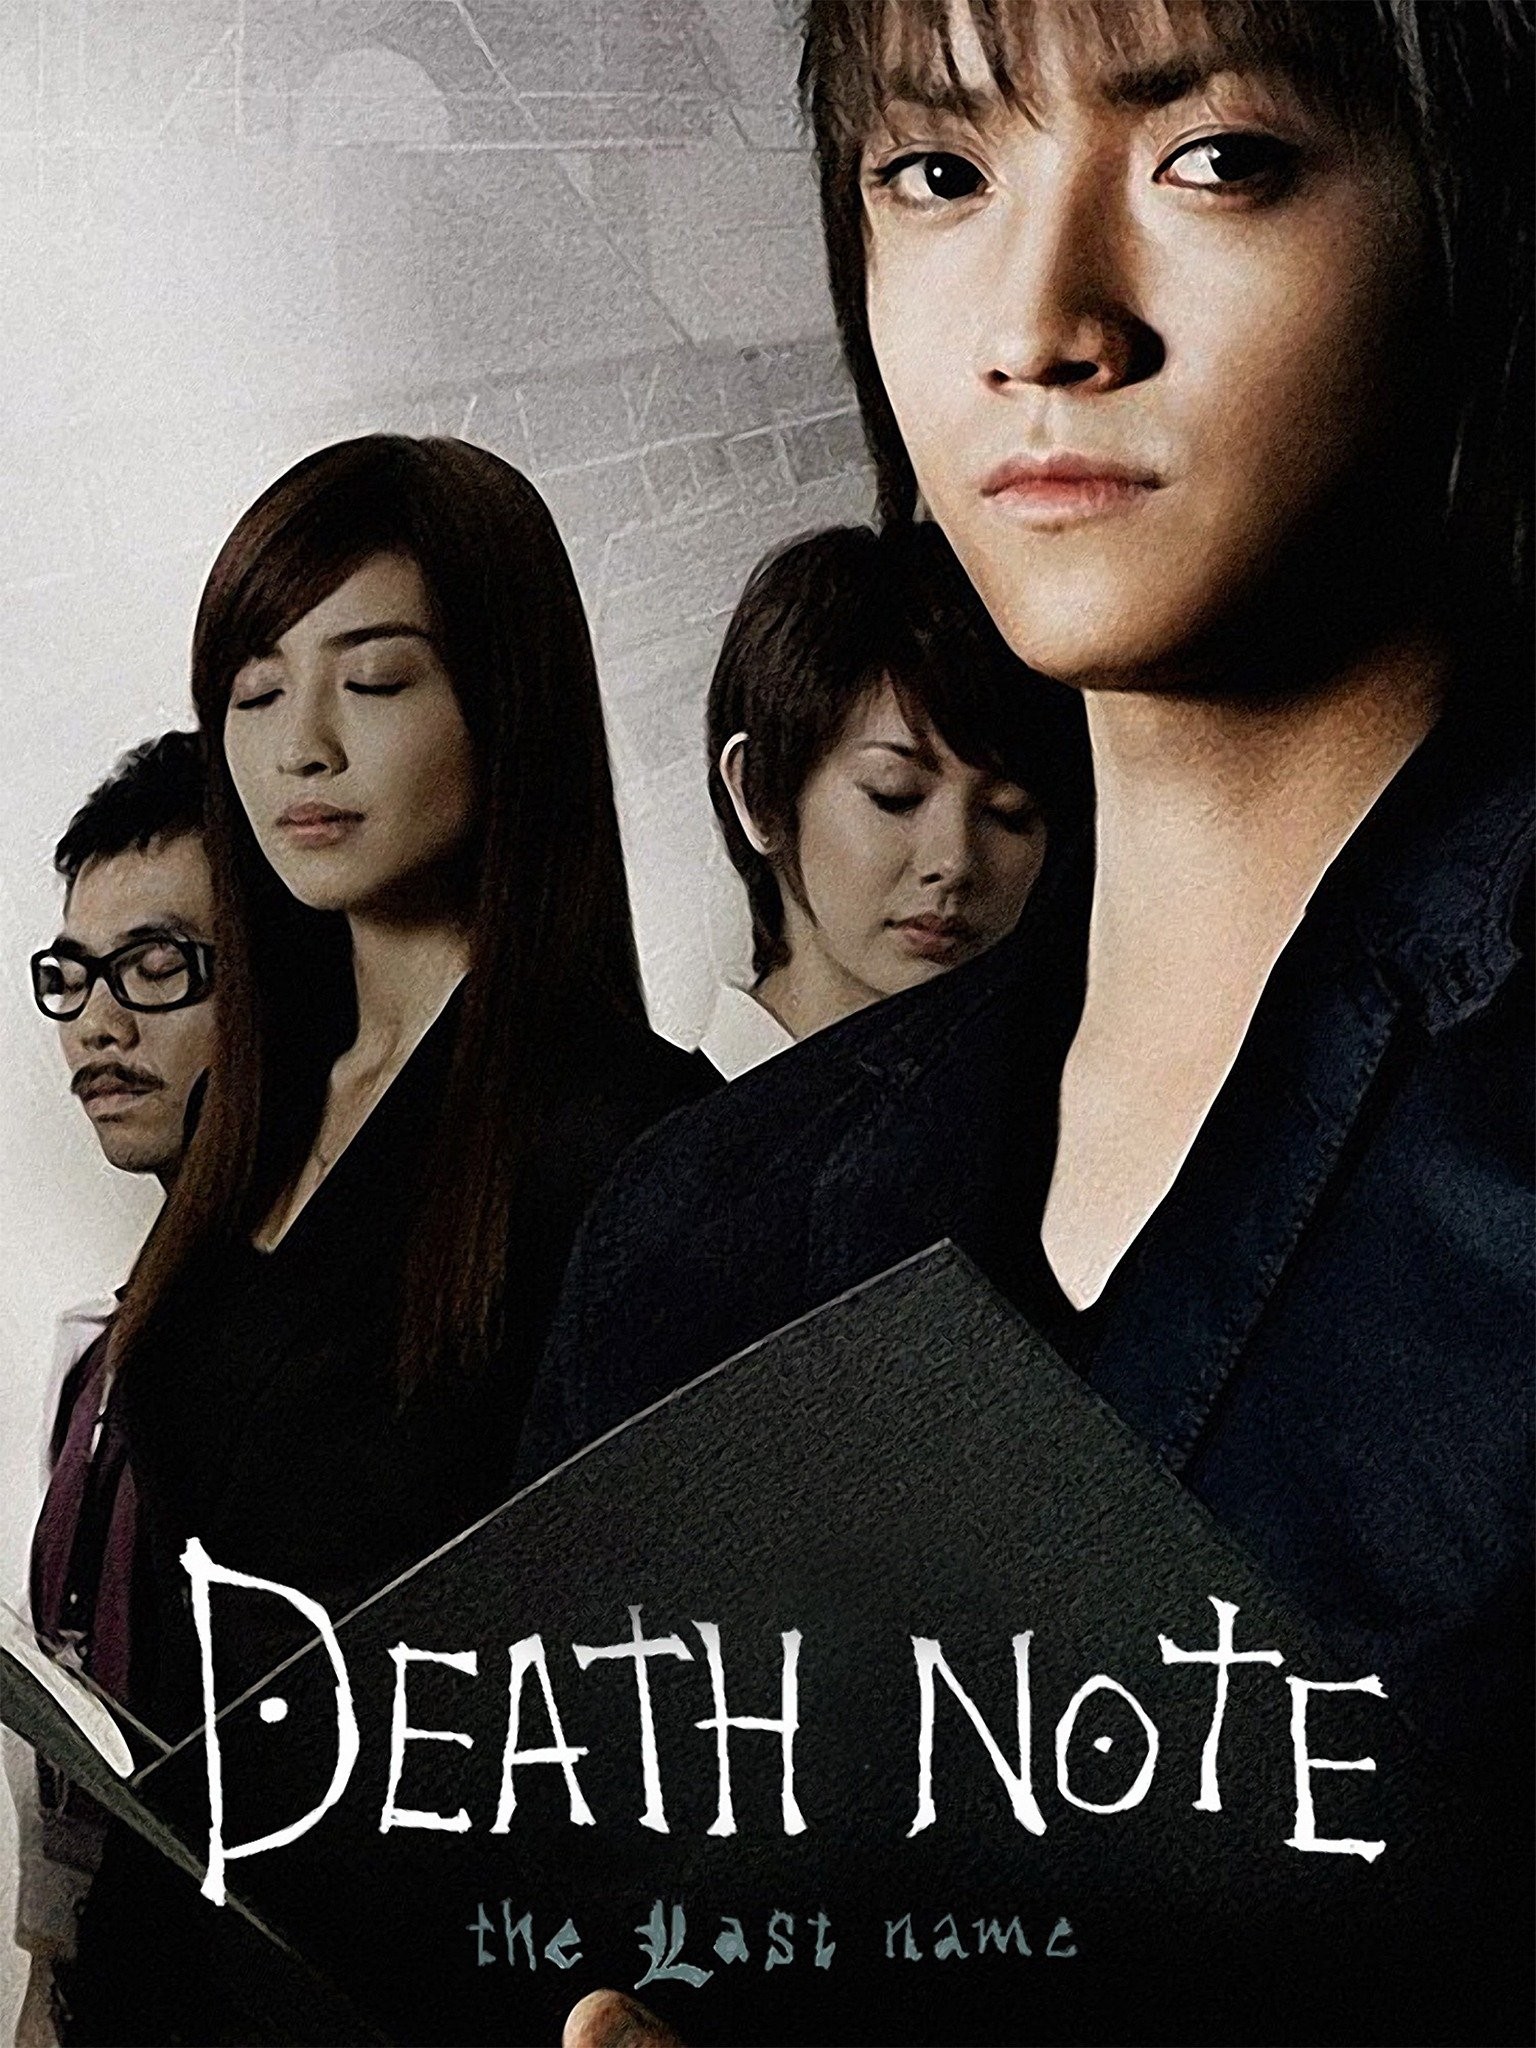 Death Note Movie Begins Shooting for Netflix